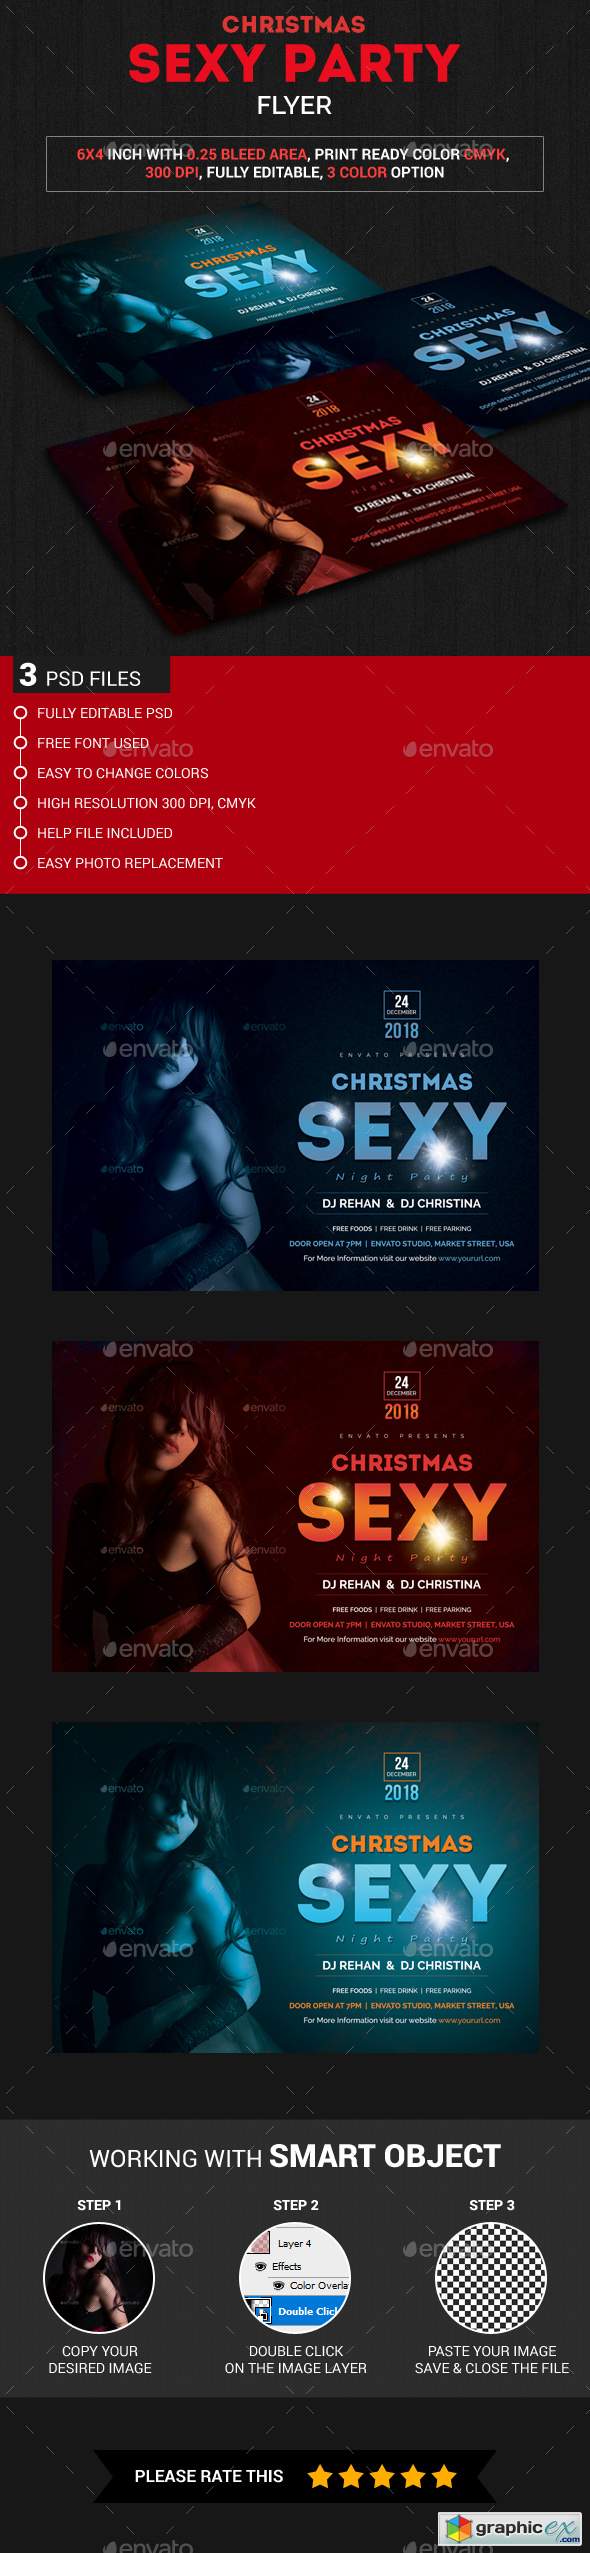 Christmas Sexy Party Flyer